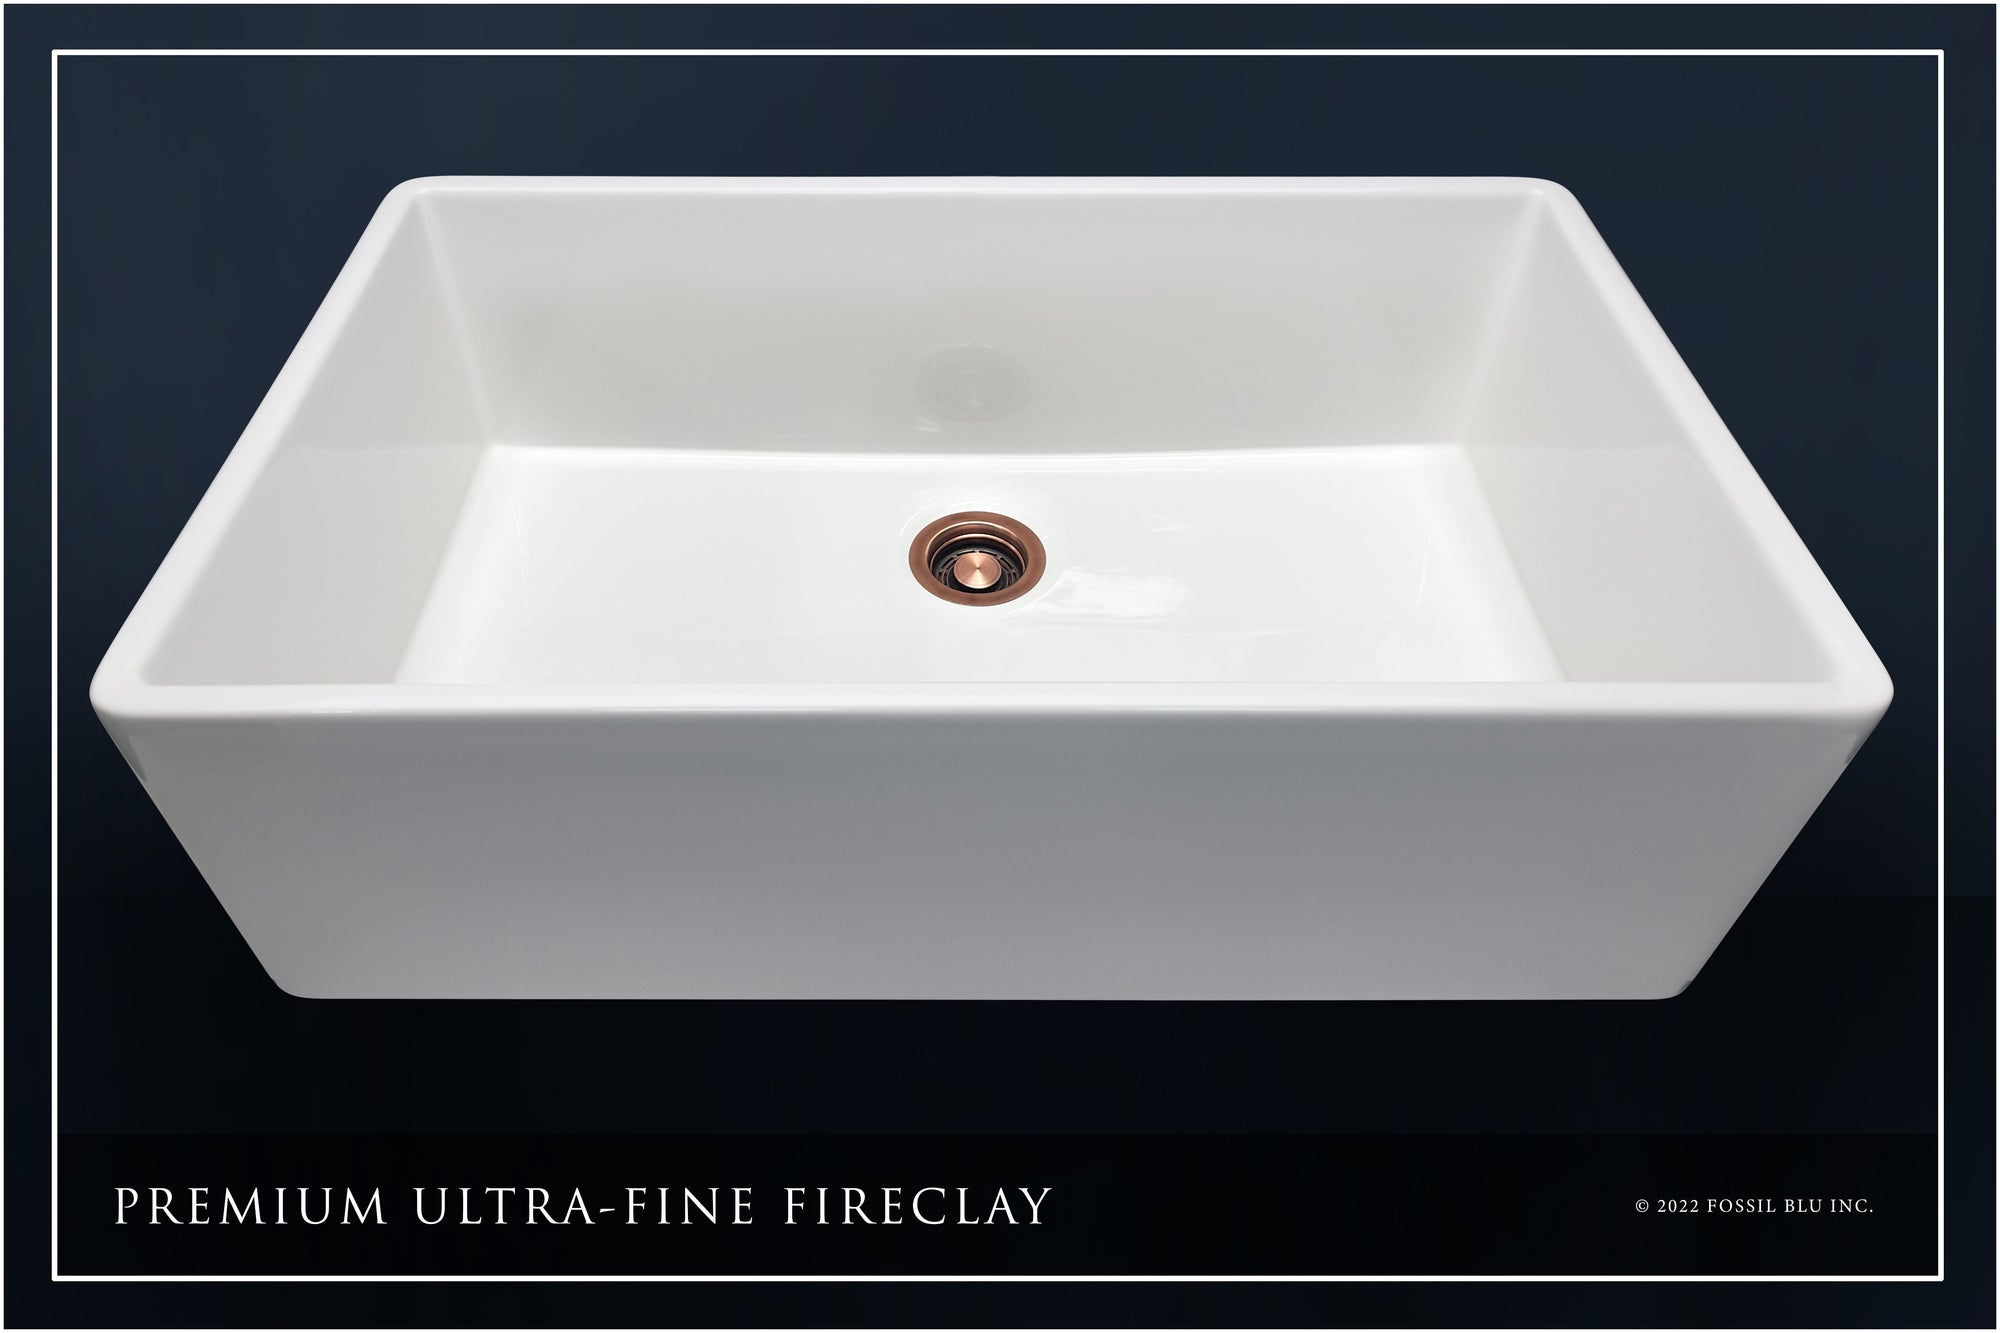 FSW1008AC LUXURY 36-INCH SOLID FIRECLAY FARMHOUSE SINK IN WHITE, ANTIQUE COPPER ACCS, FLAT FRONT